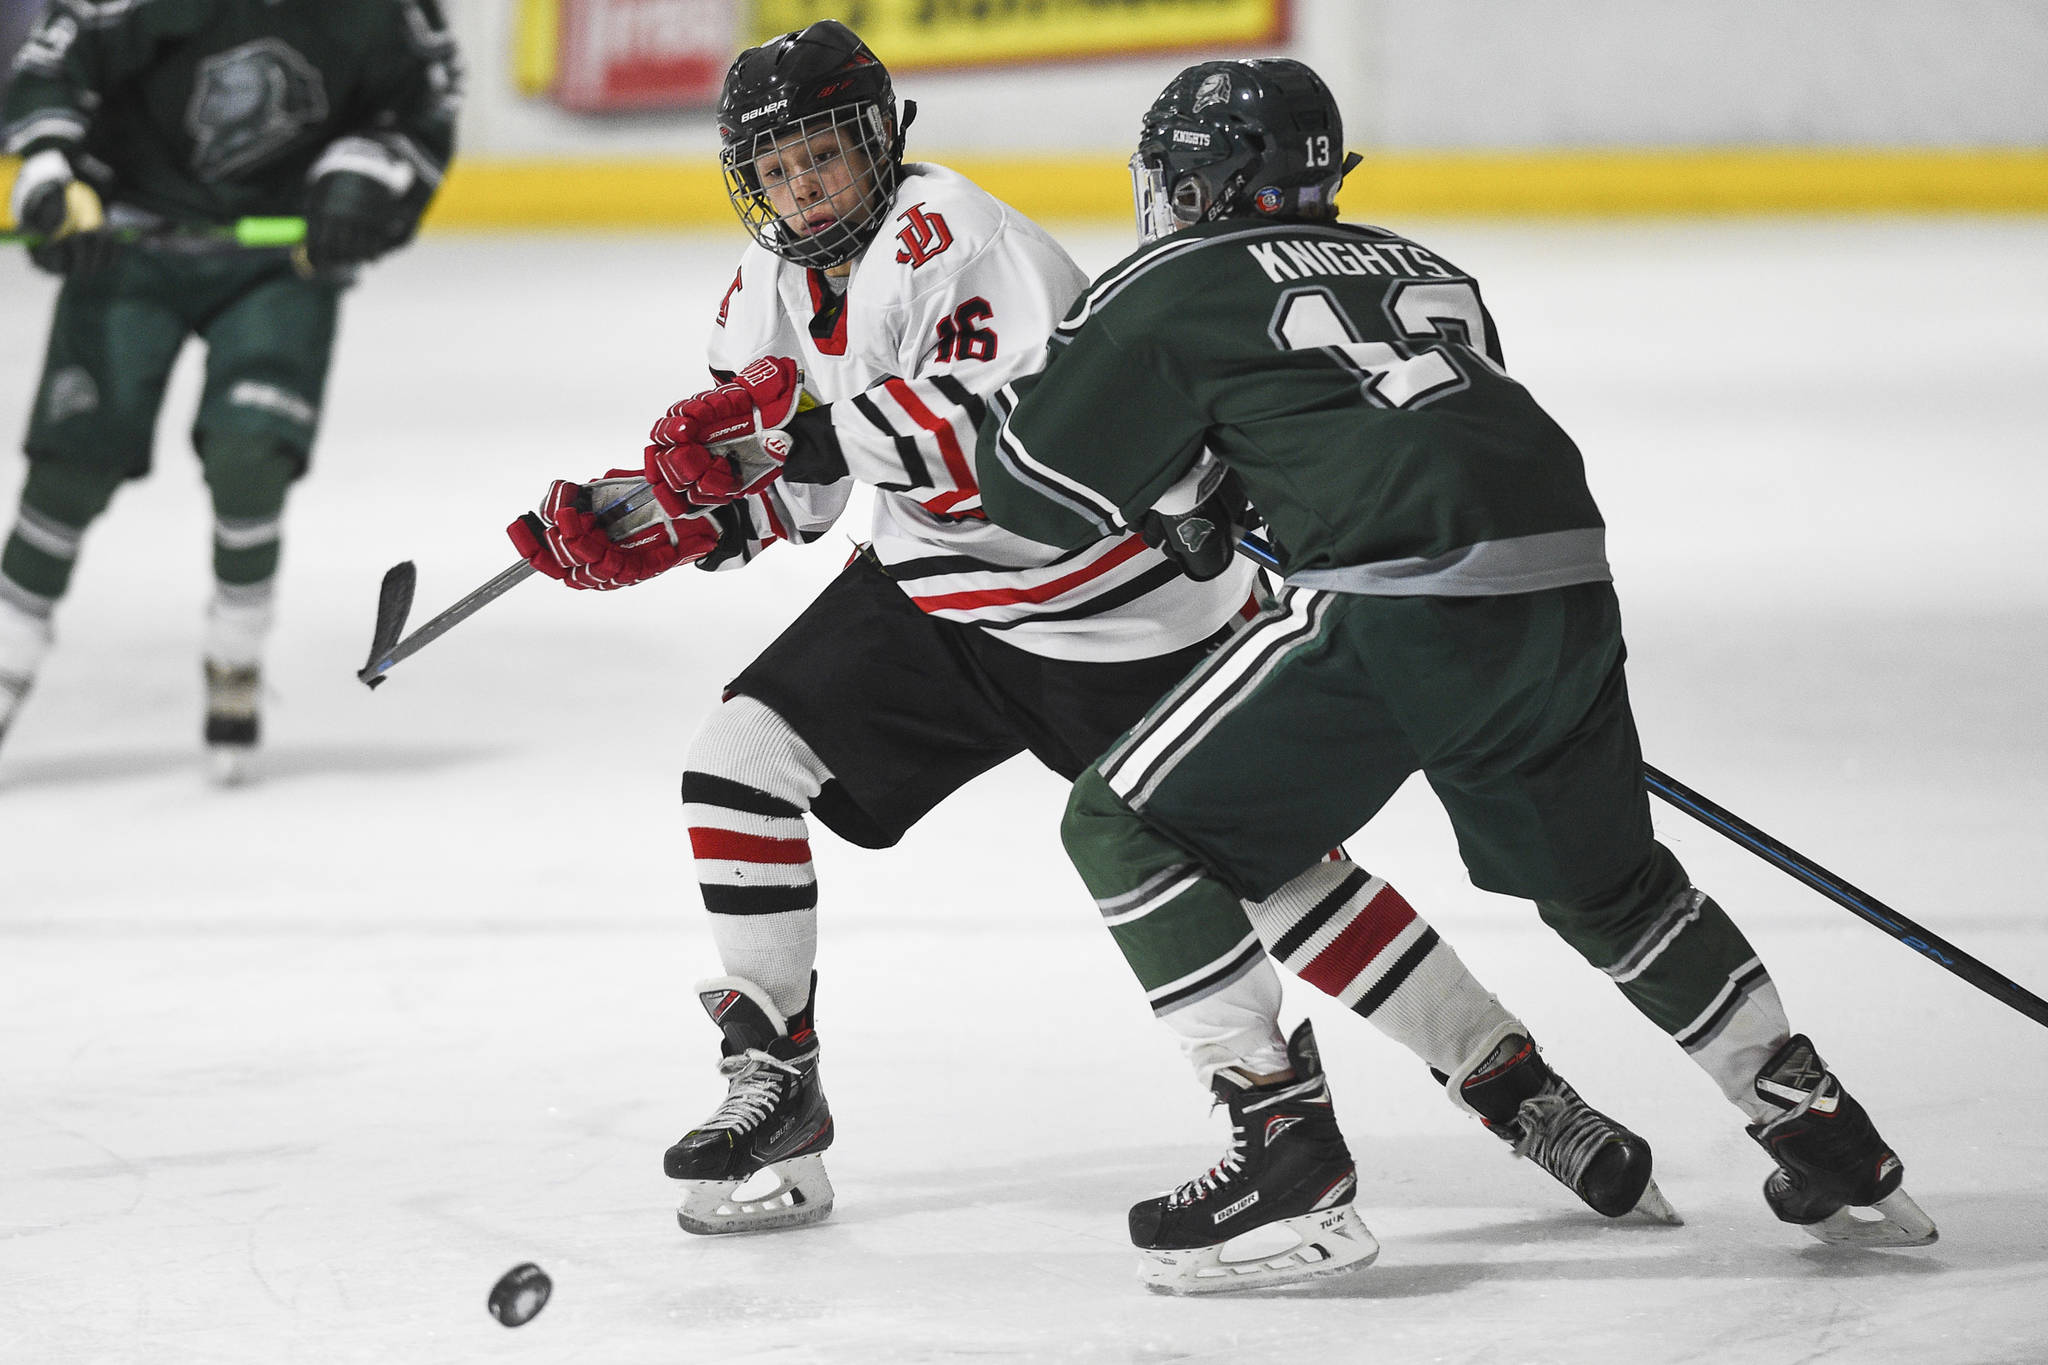 Juneau-Douglas’ Zac Stagg, left, moves the puck against Colony’s Cauy Trangmoe at Treadwell Arena on Friday, Nov. 22, 2019. (Michael Penn | Juneau Empire)